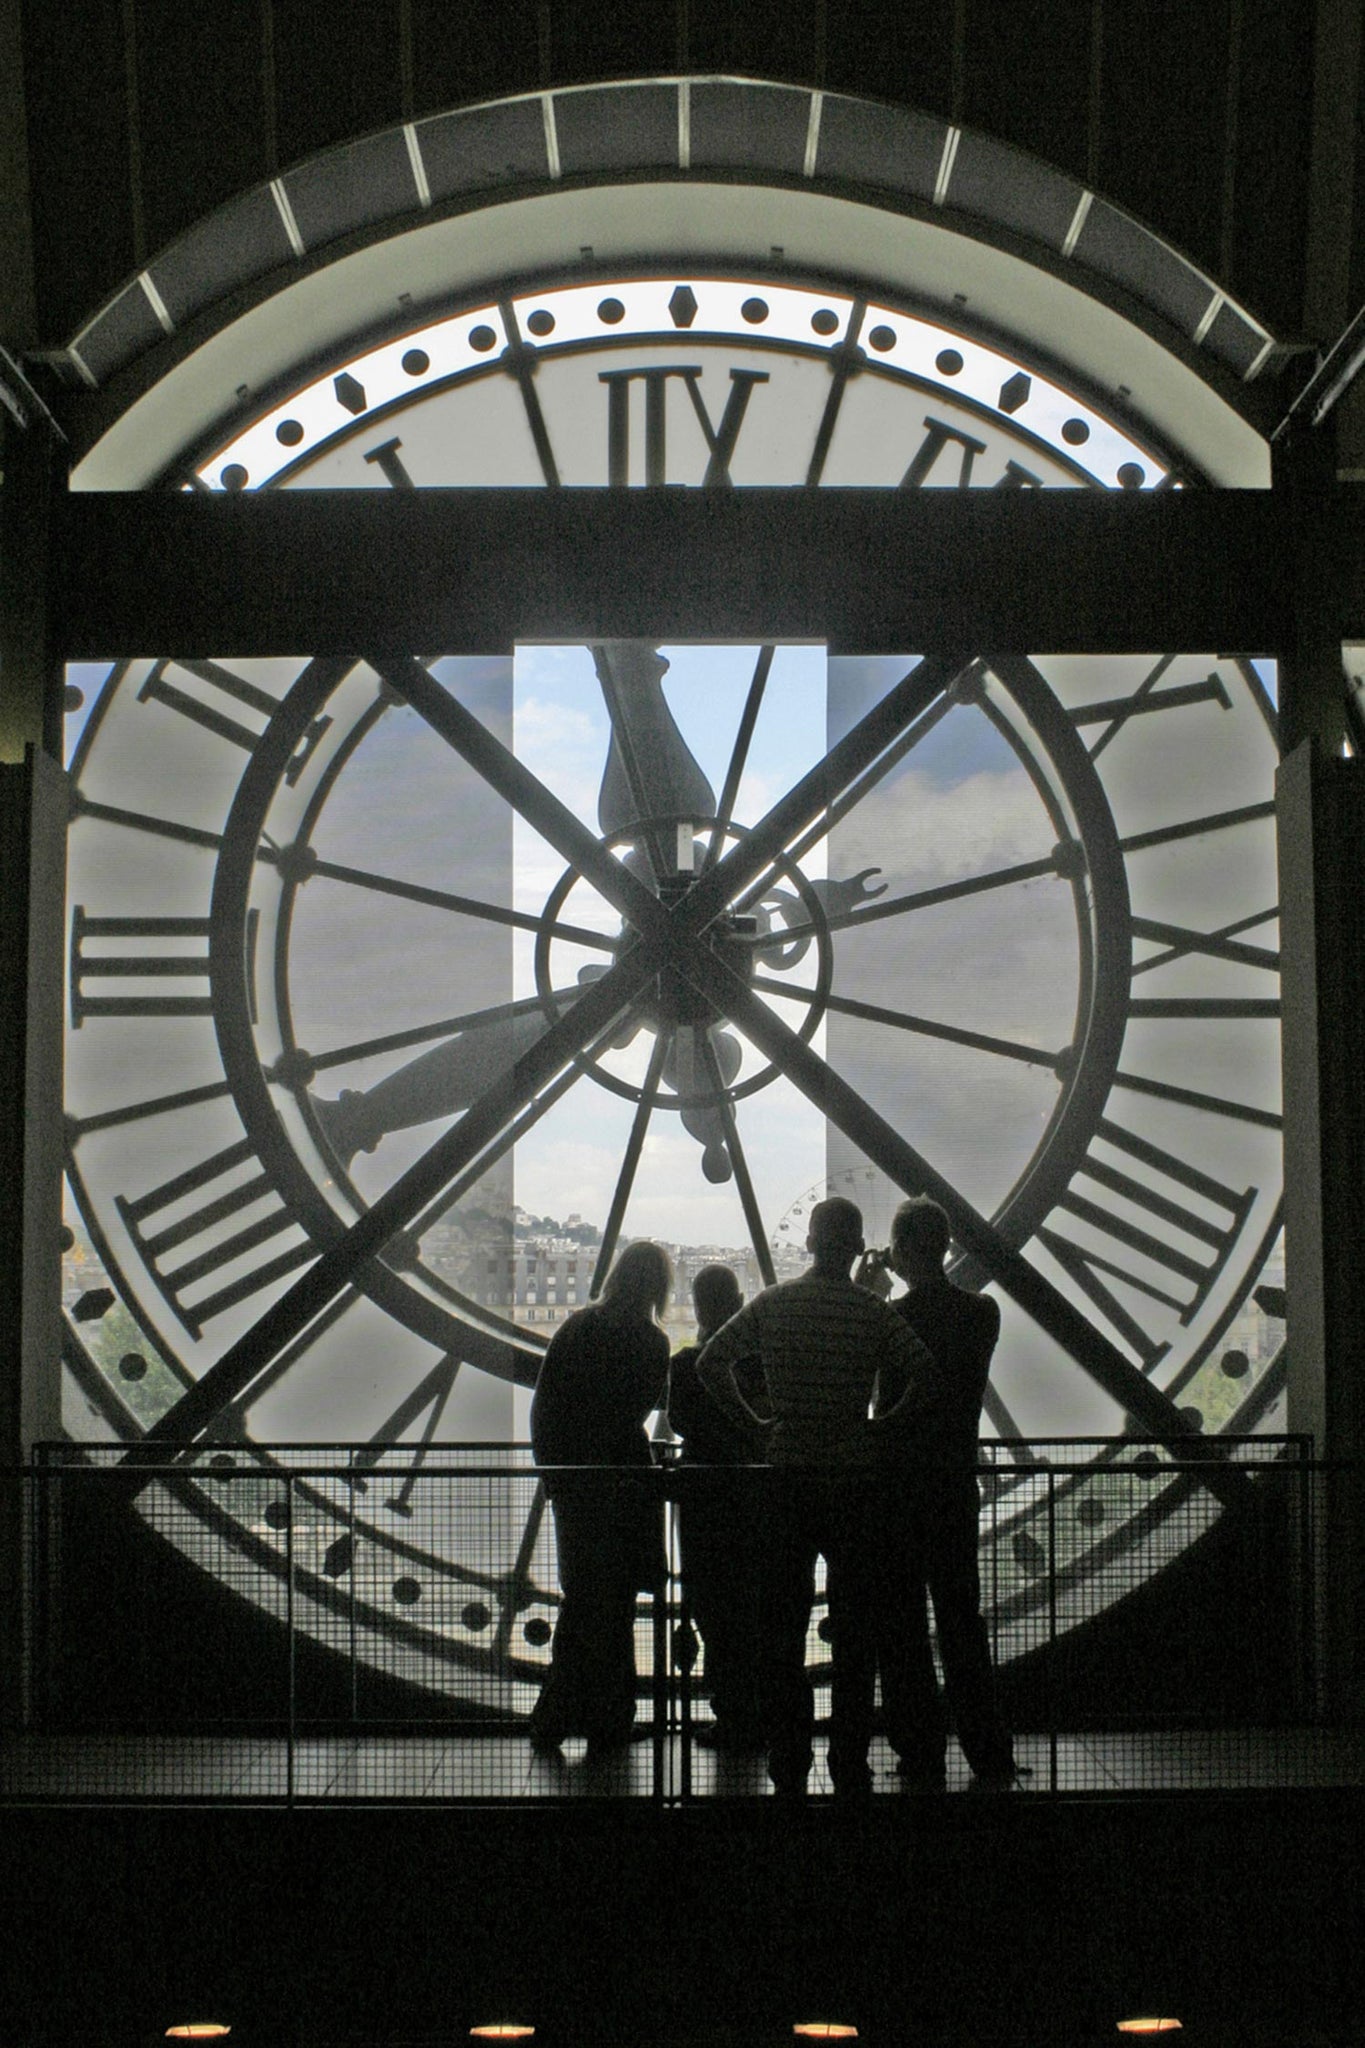 A silhouette of four people admiring the view of Paris, through a clock window at The Musee d'Orsay in Paris.